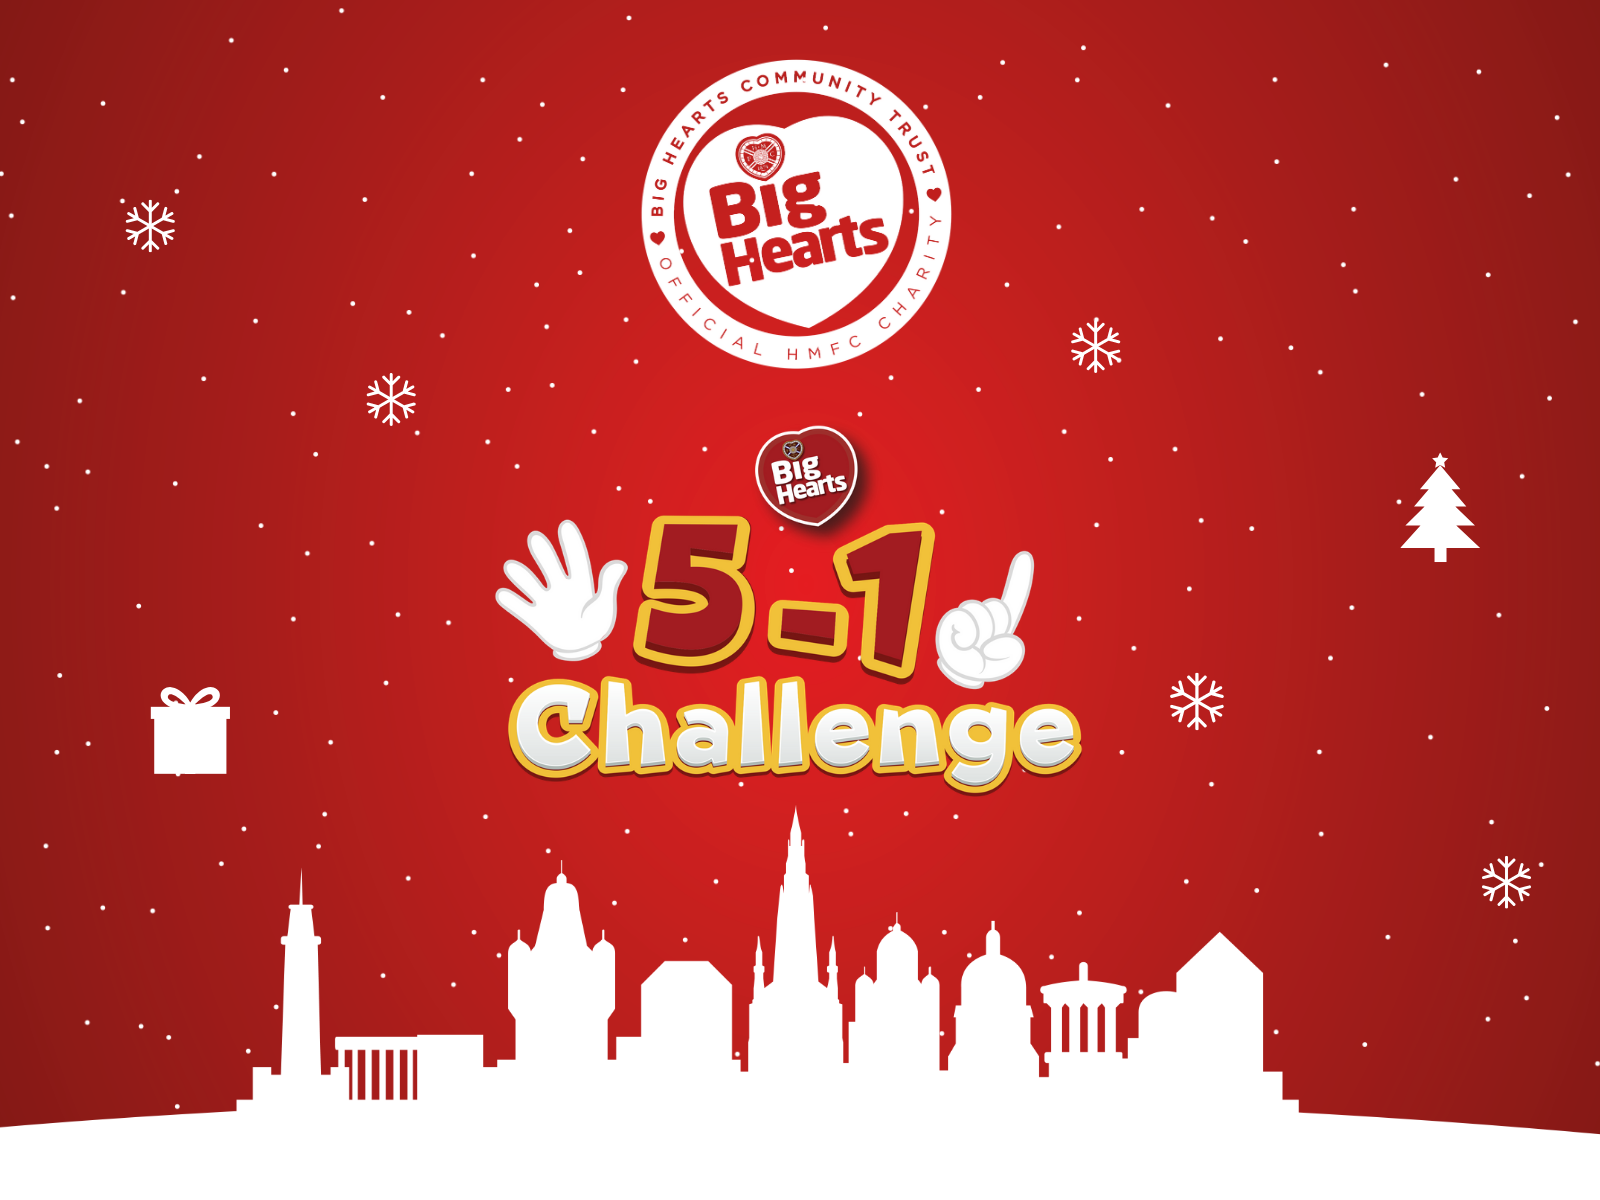  » Take on the 5-1 challenge to make a positive difference at Christmas!